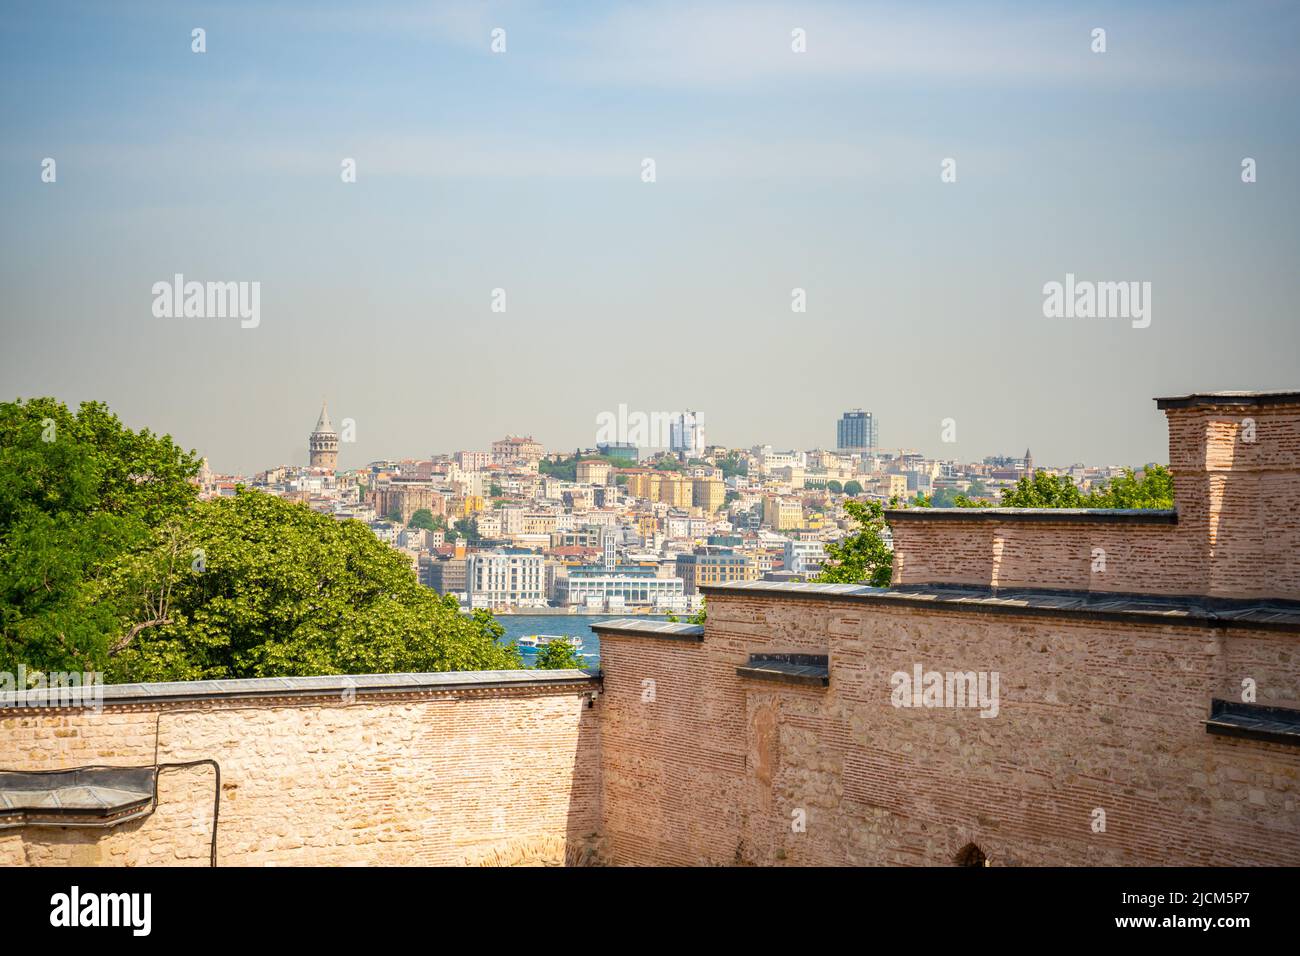 Panoramic view of Asian side or anatolian side of Istanbul including Kadikoy and Uskudar districts from Topkapi Palace. Stock Photo